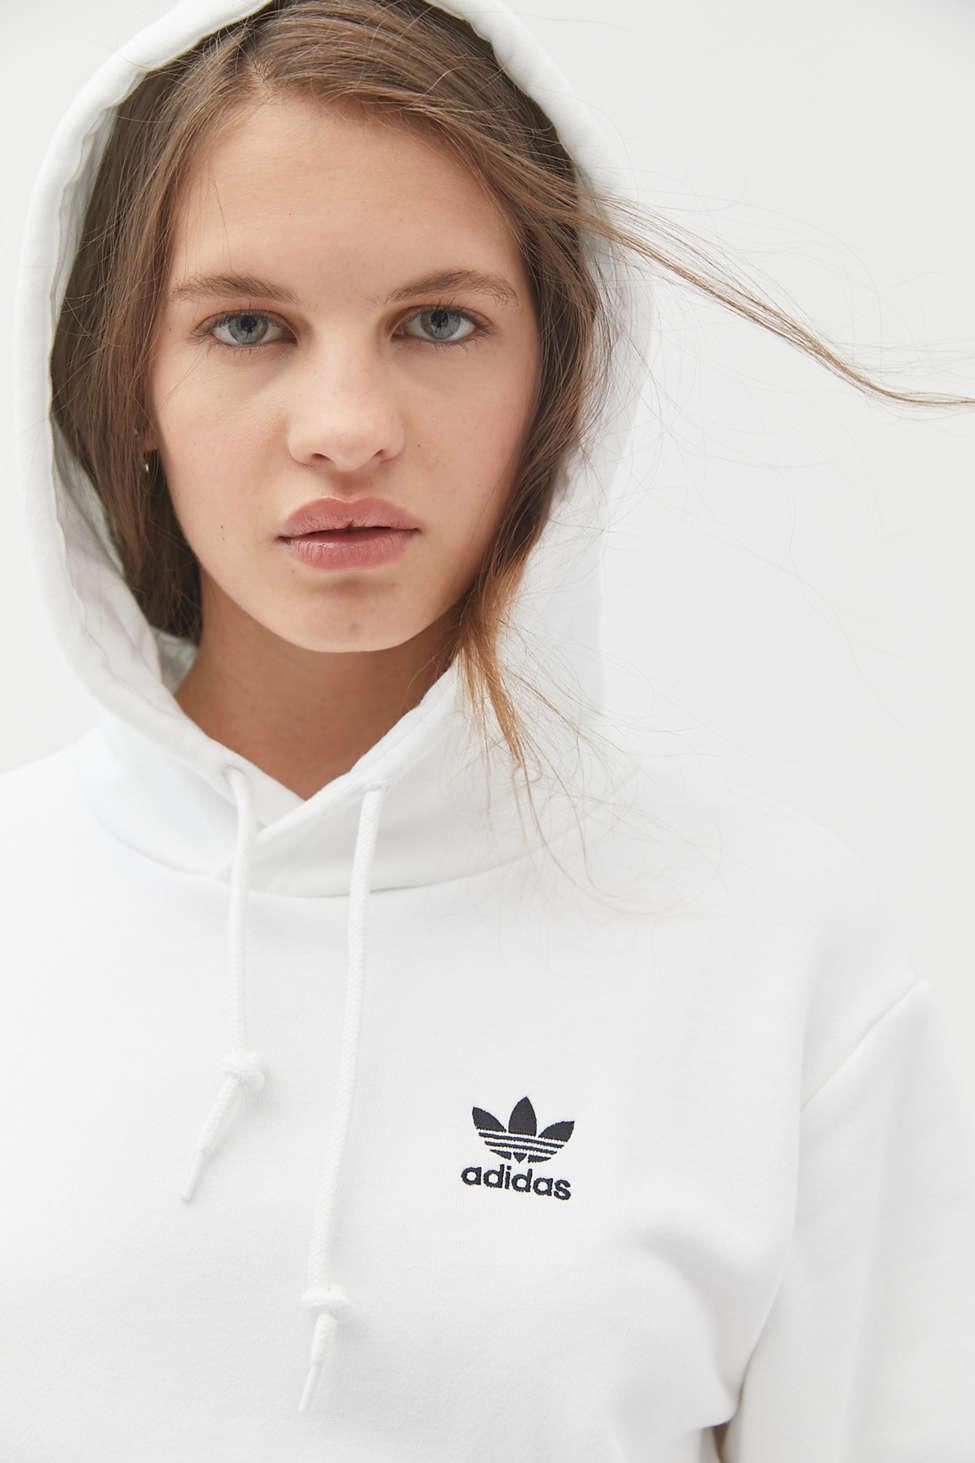 adidas brand with the 3 stripes hoodie